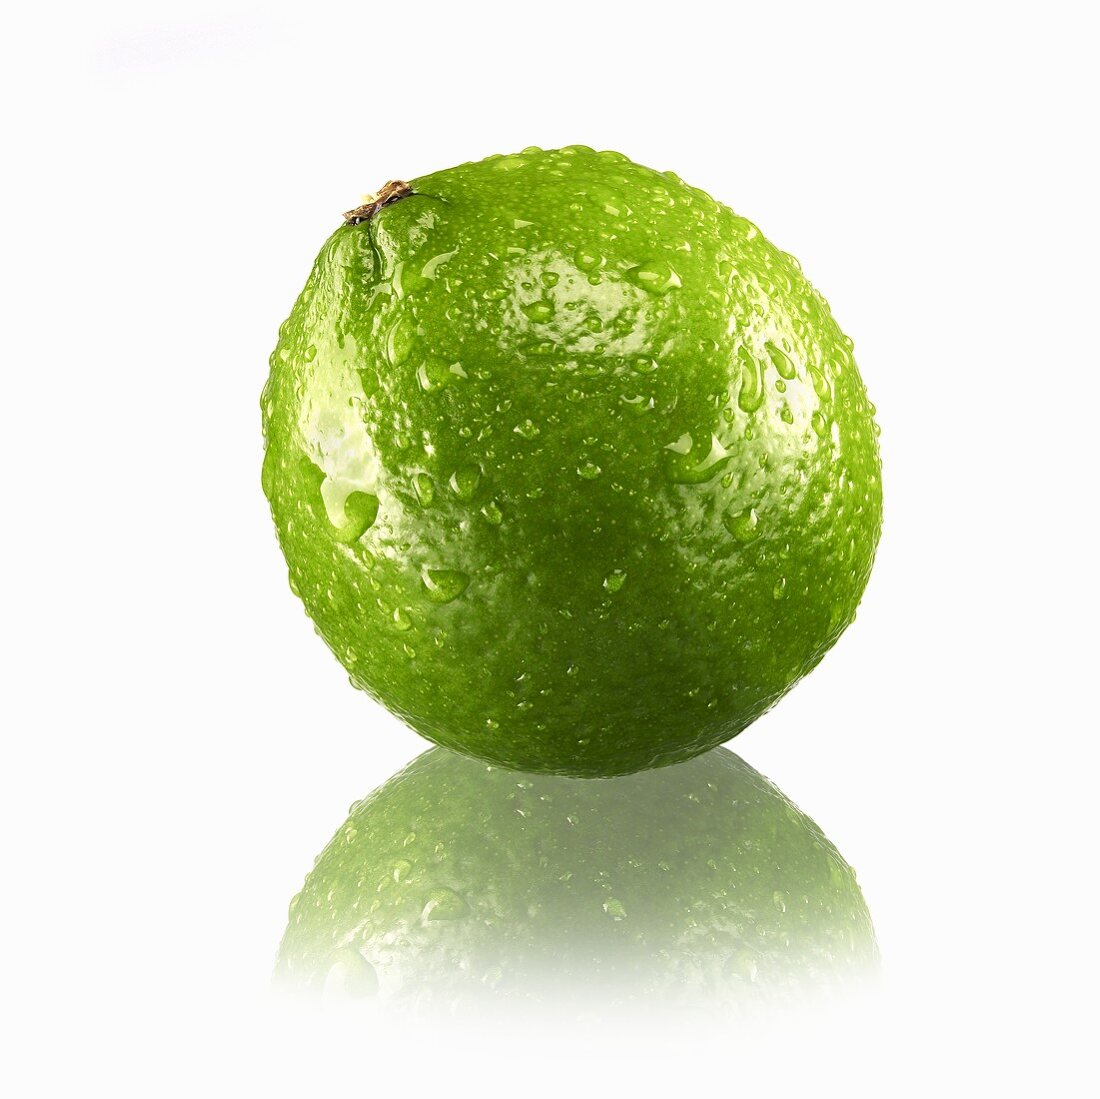 Lime with drops of water and reflection